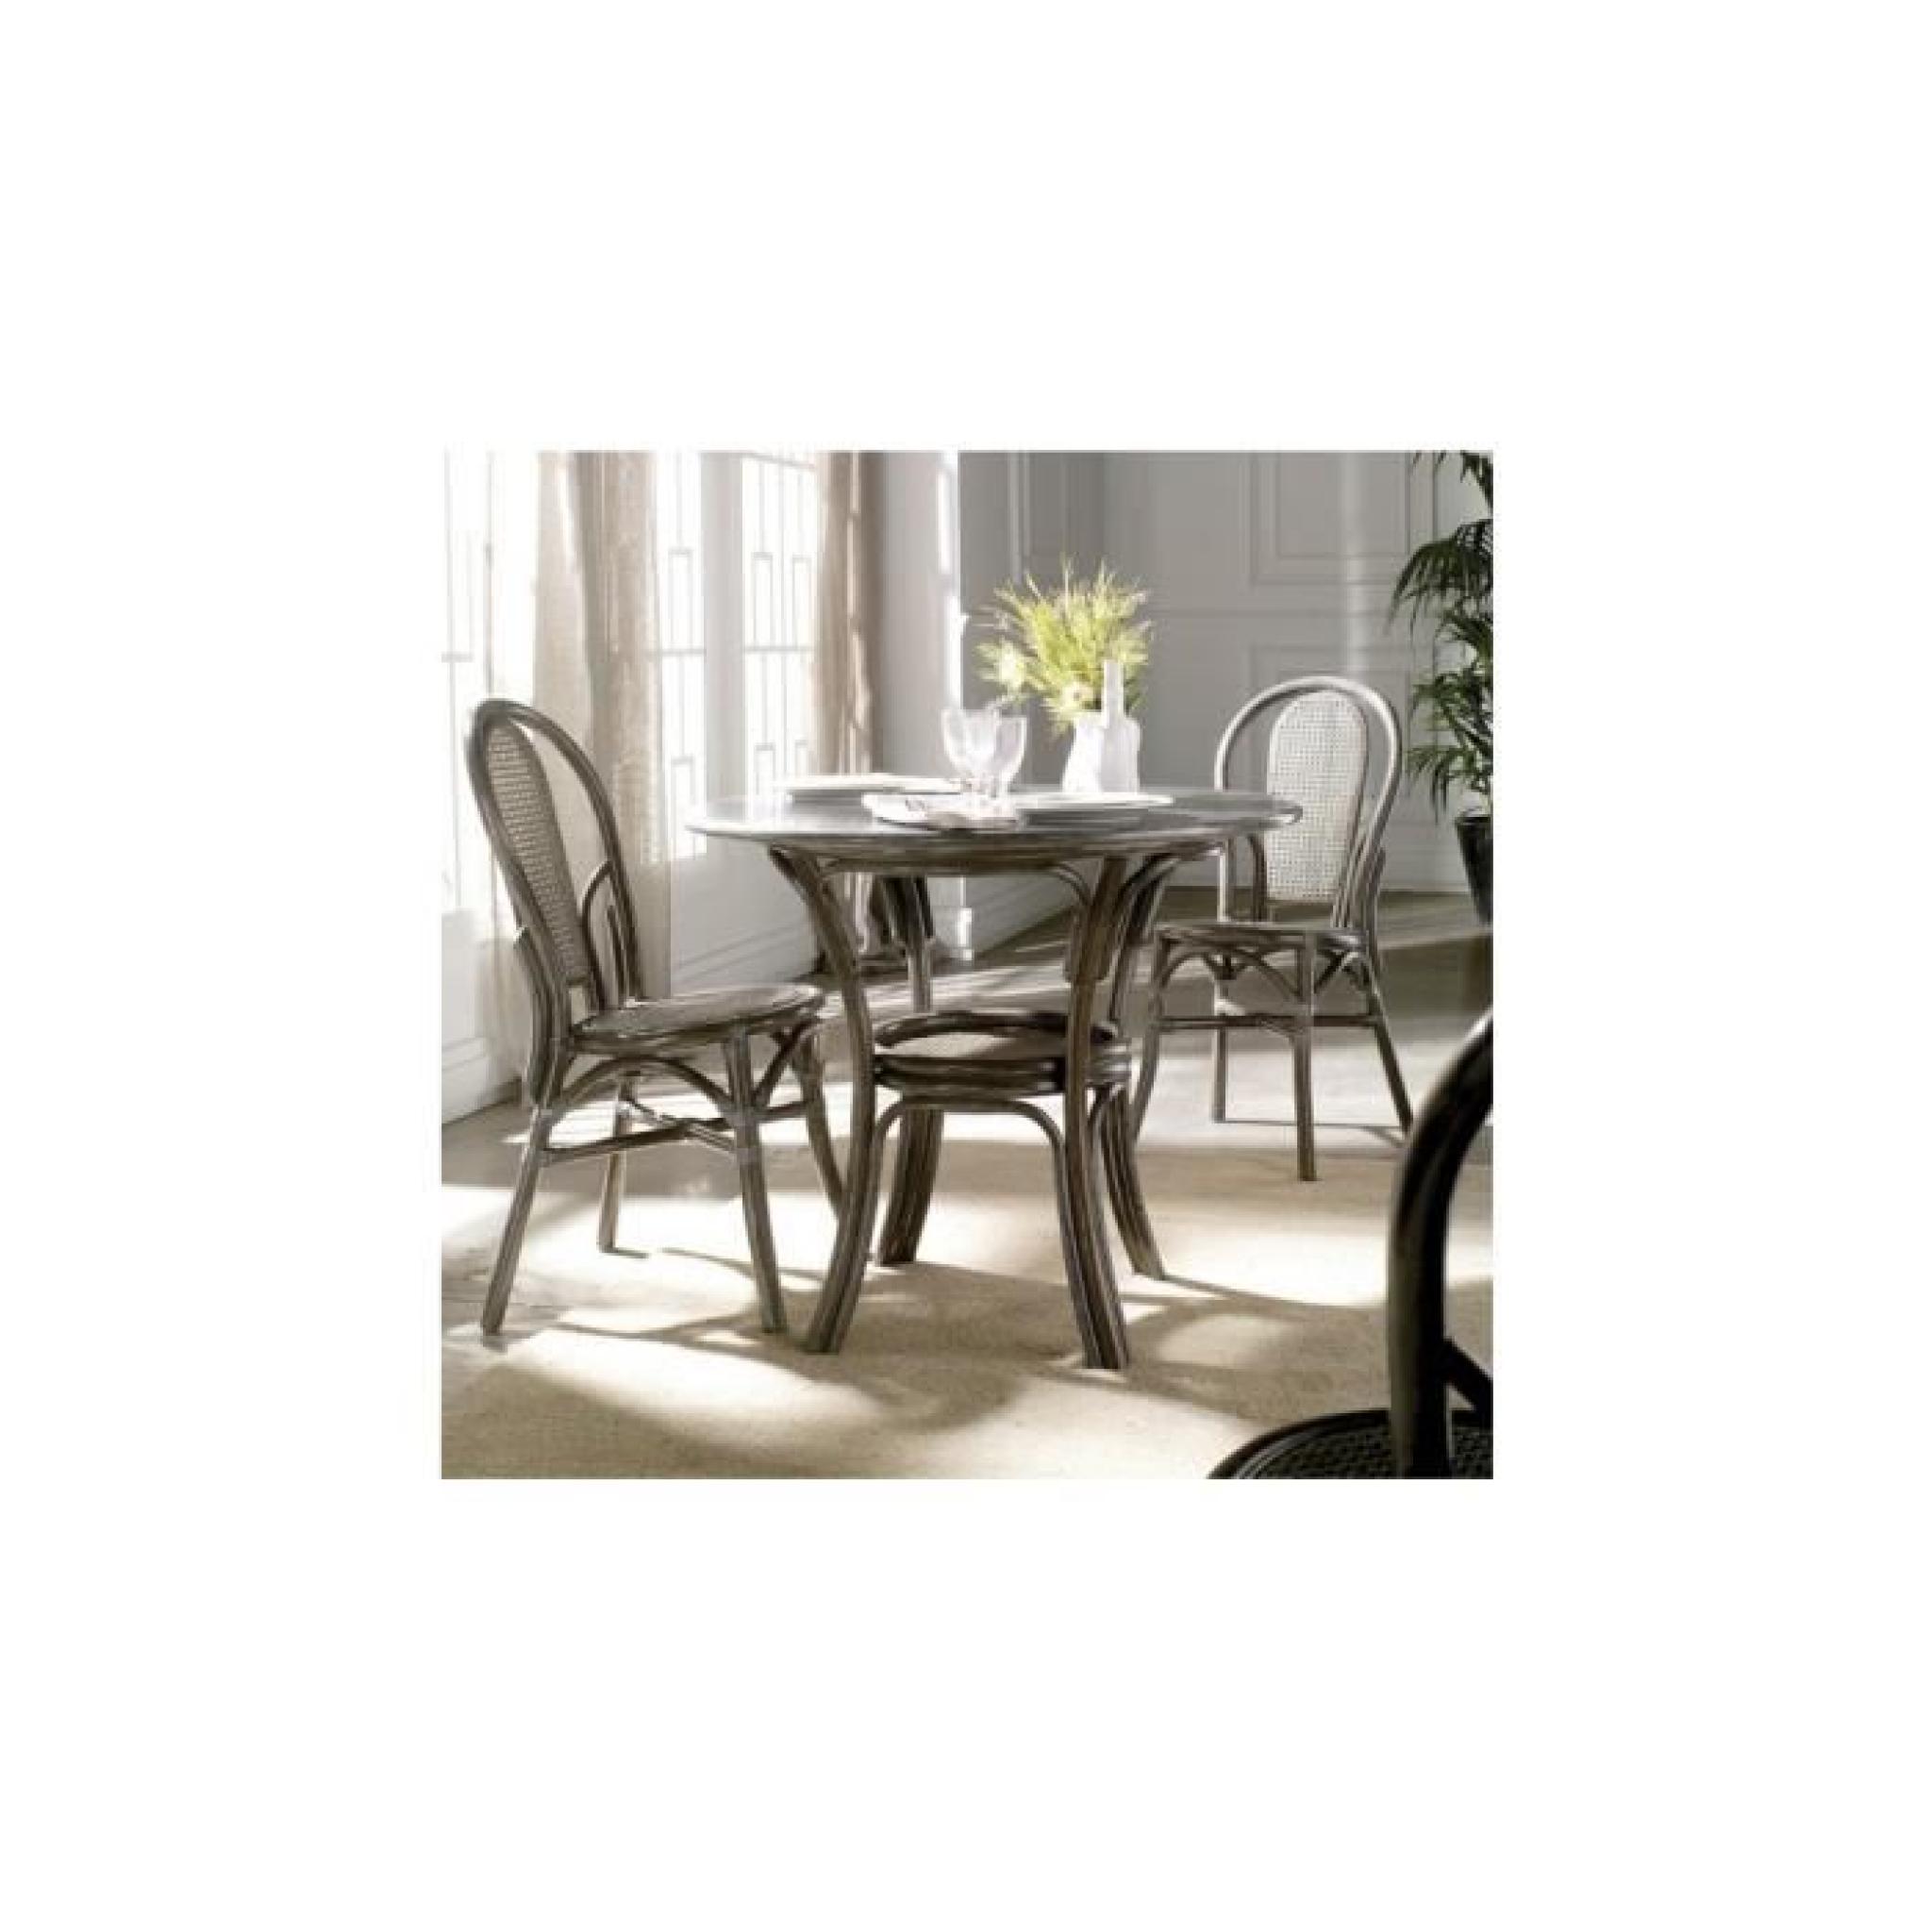 Chaise bistrot rotin et cannage gris pas cher